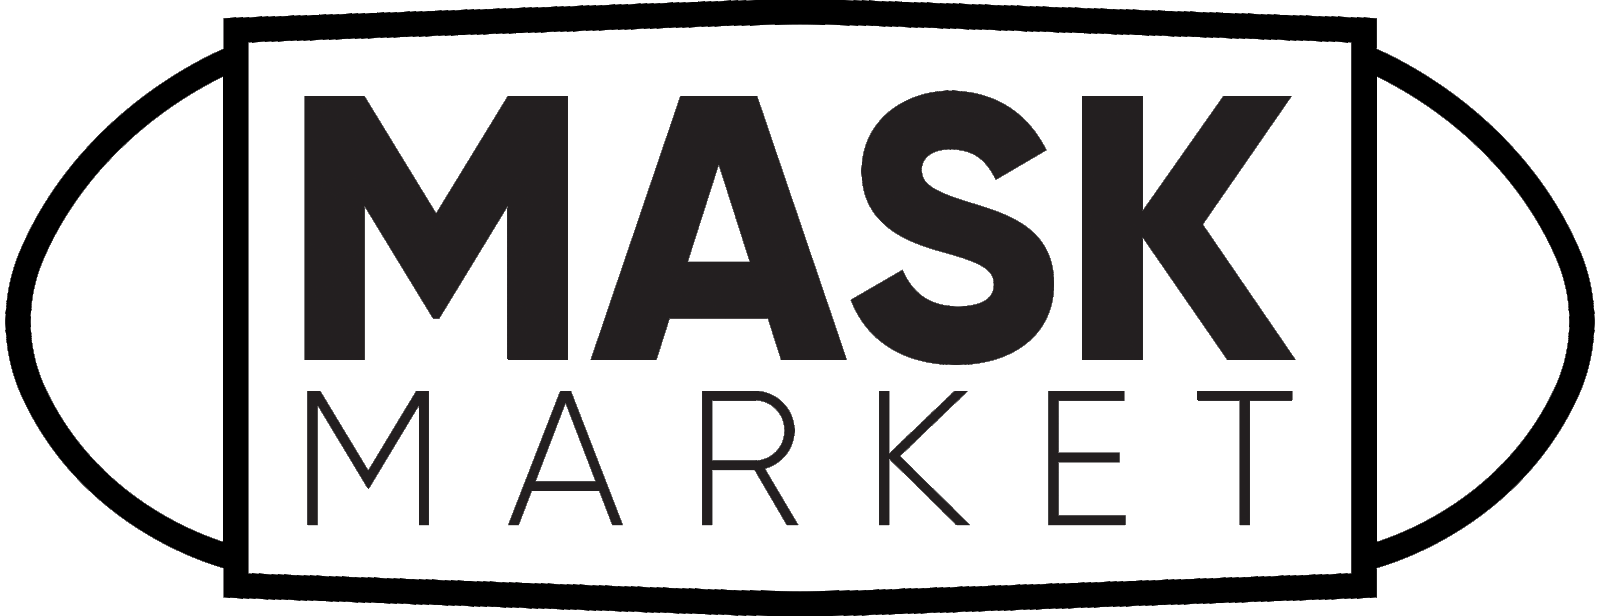 Its a Local 4 Free Friday! Mask Market Rules